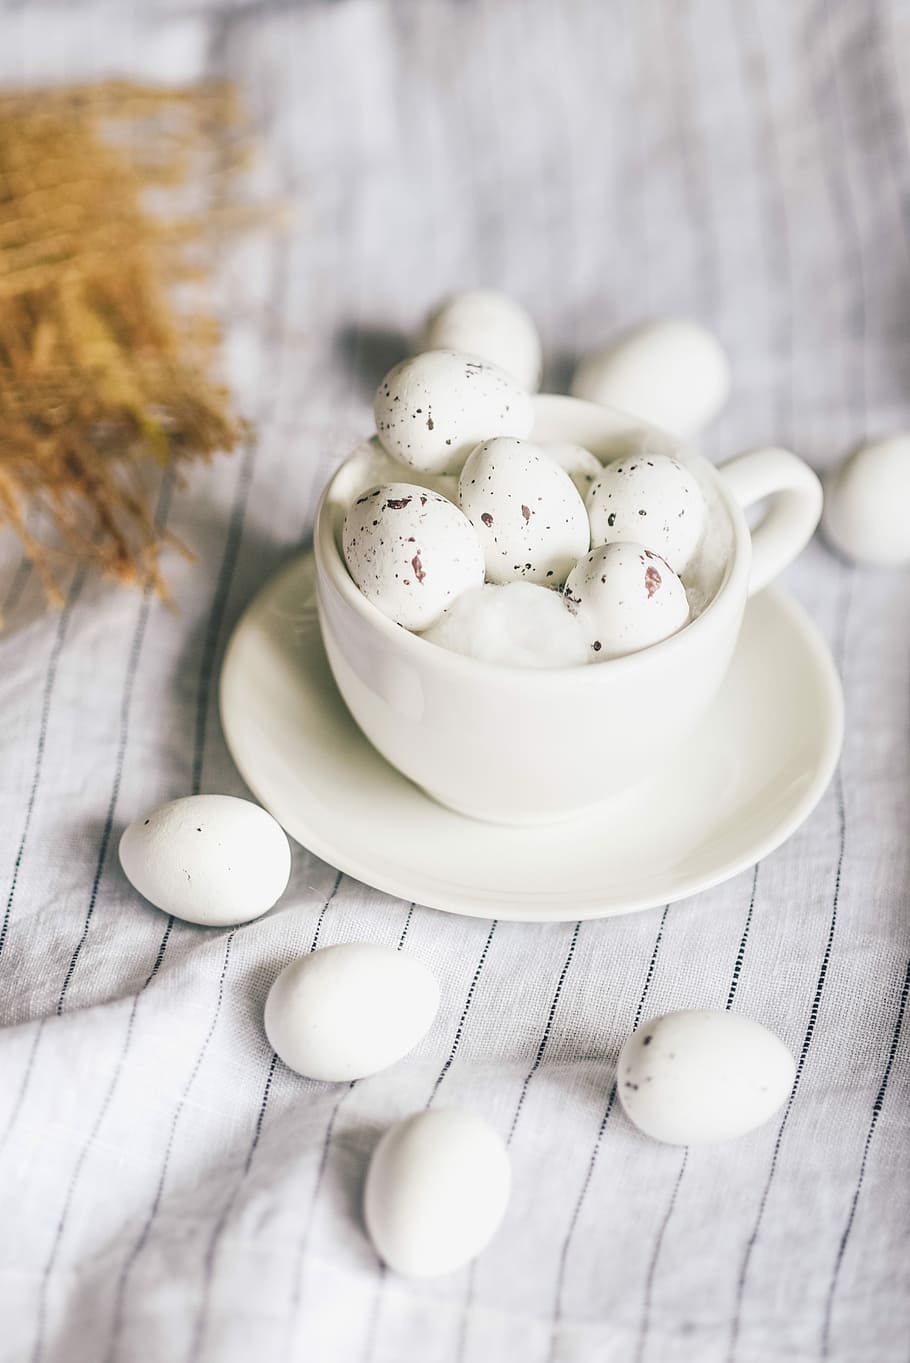 small eggs on table and in the cup, quail eggs in white ceramic teacup, HD wallpaper